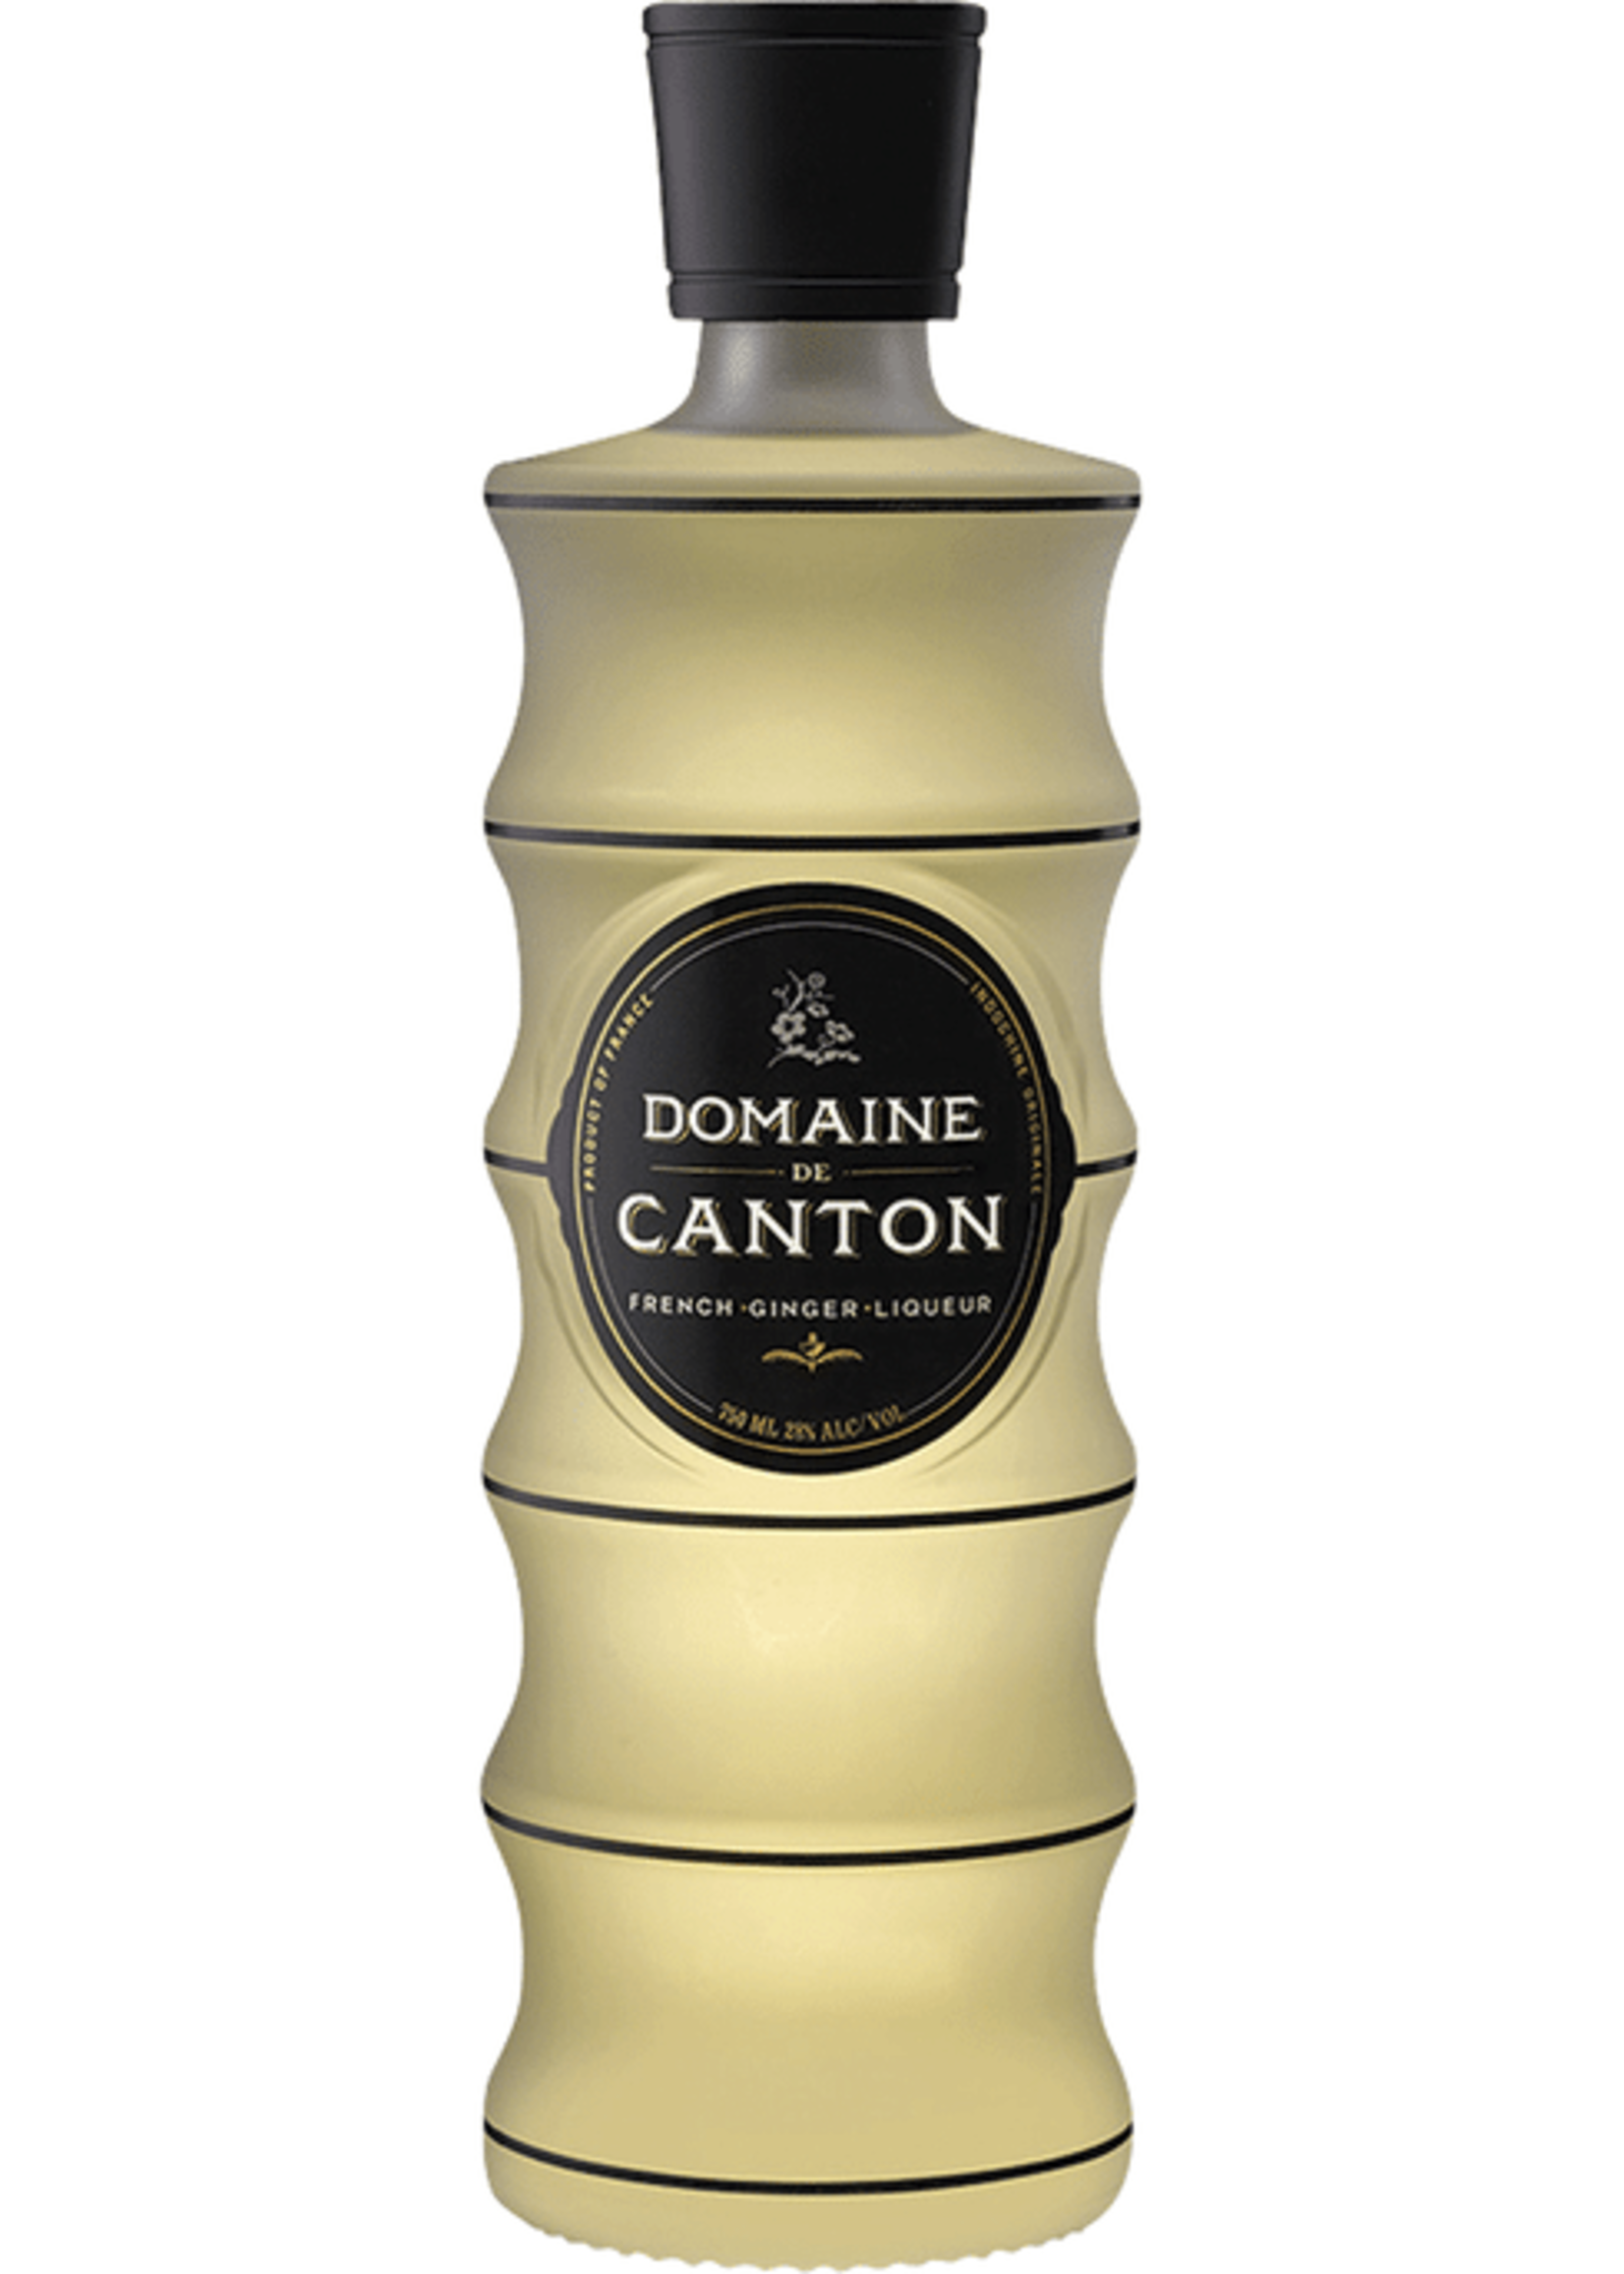 CANTON CANTON	FRENCH GINGER LIQUEUR	.750L